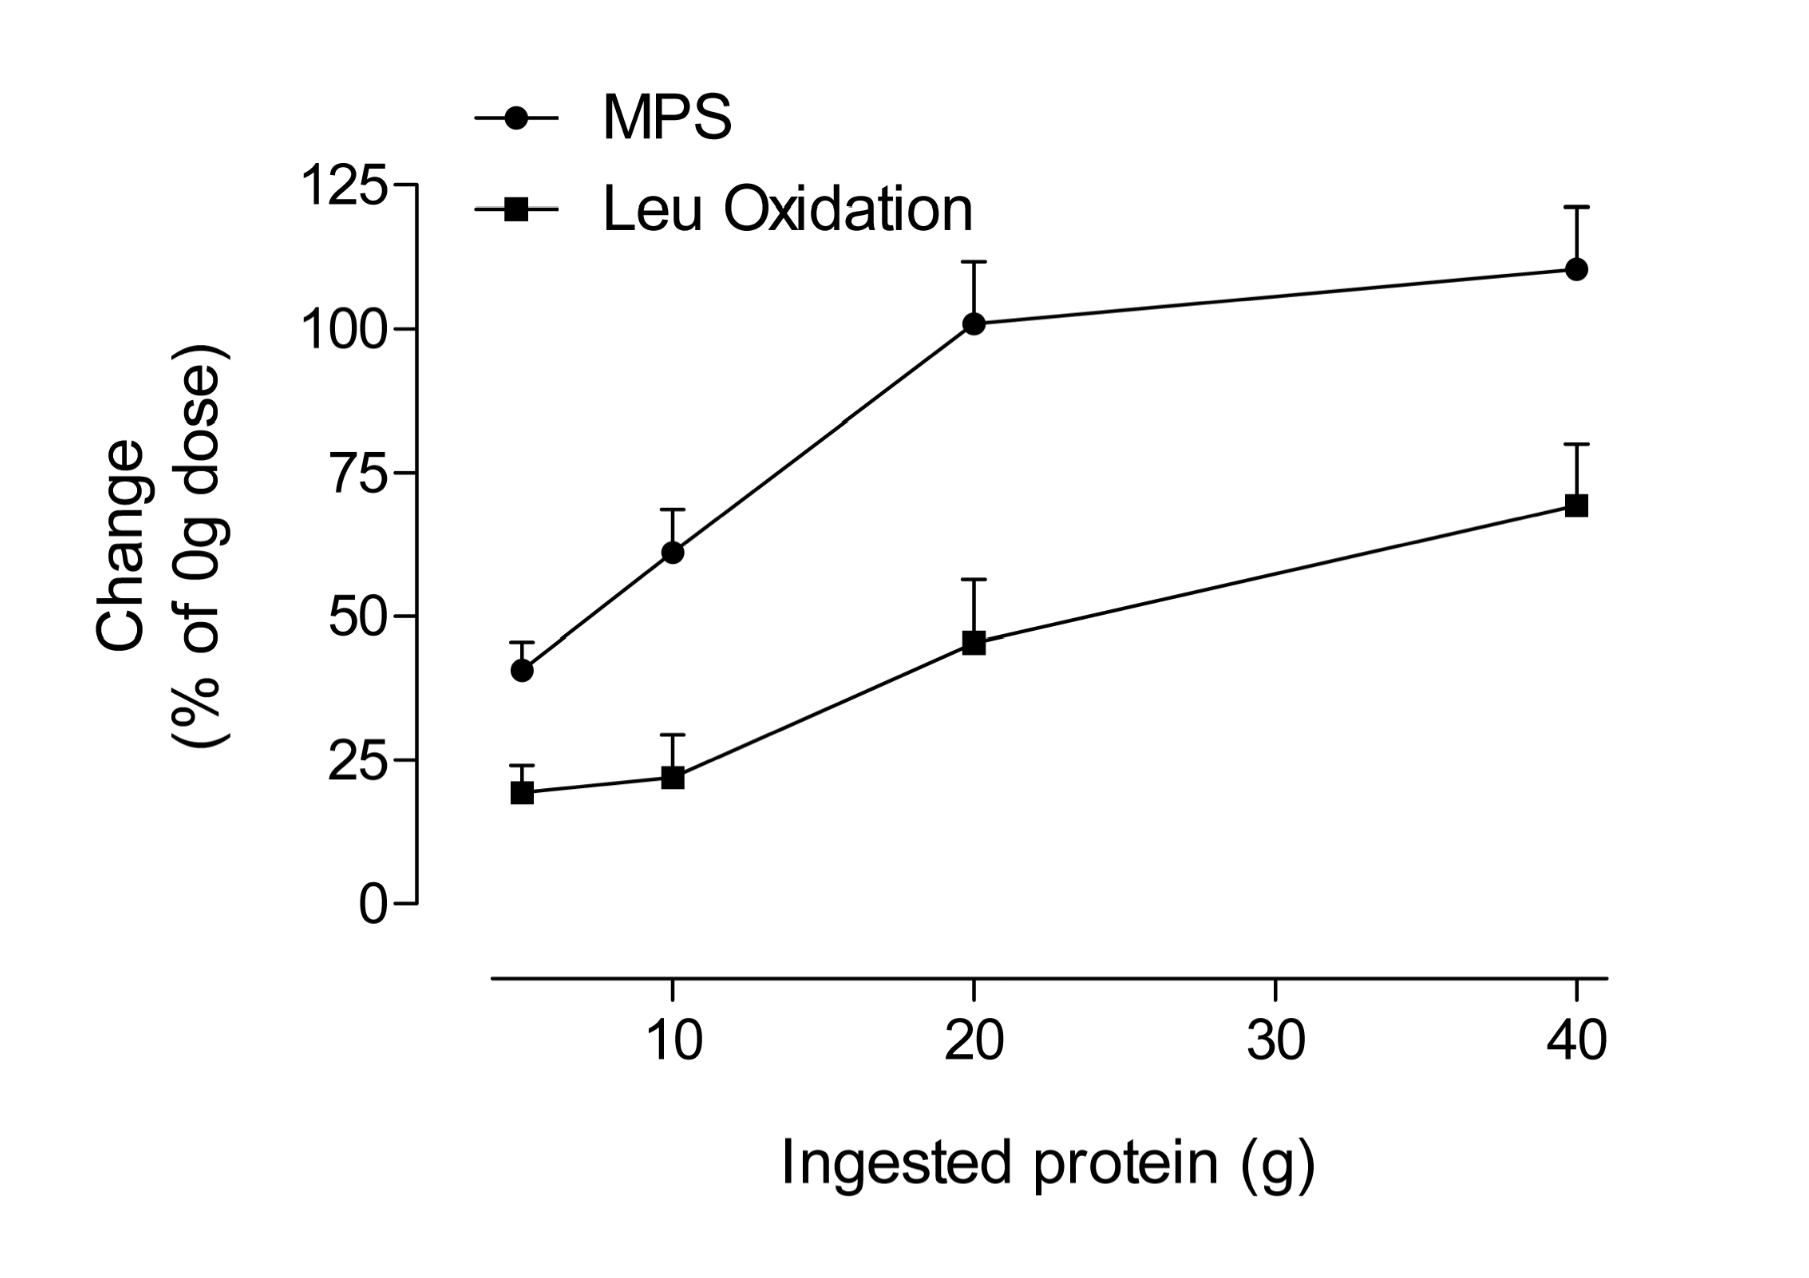 Muscle protein synthesis